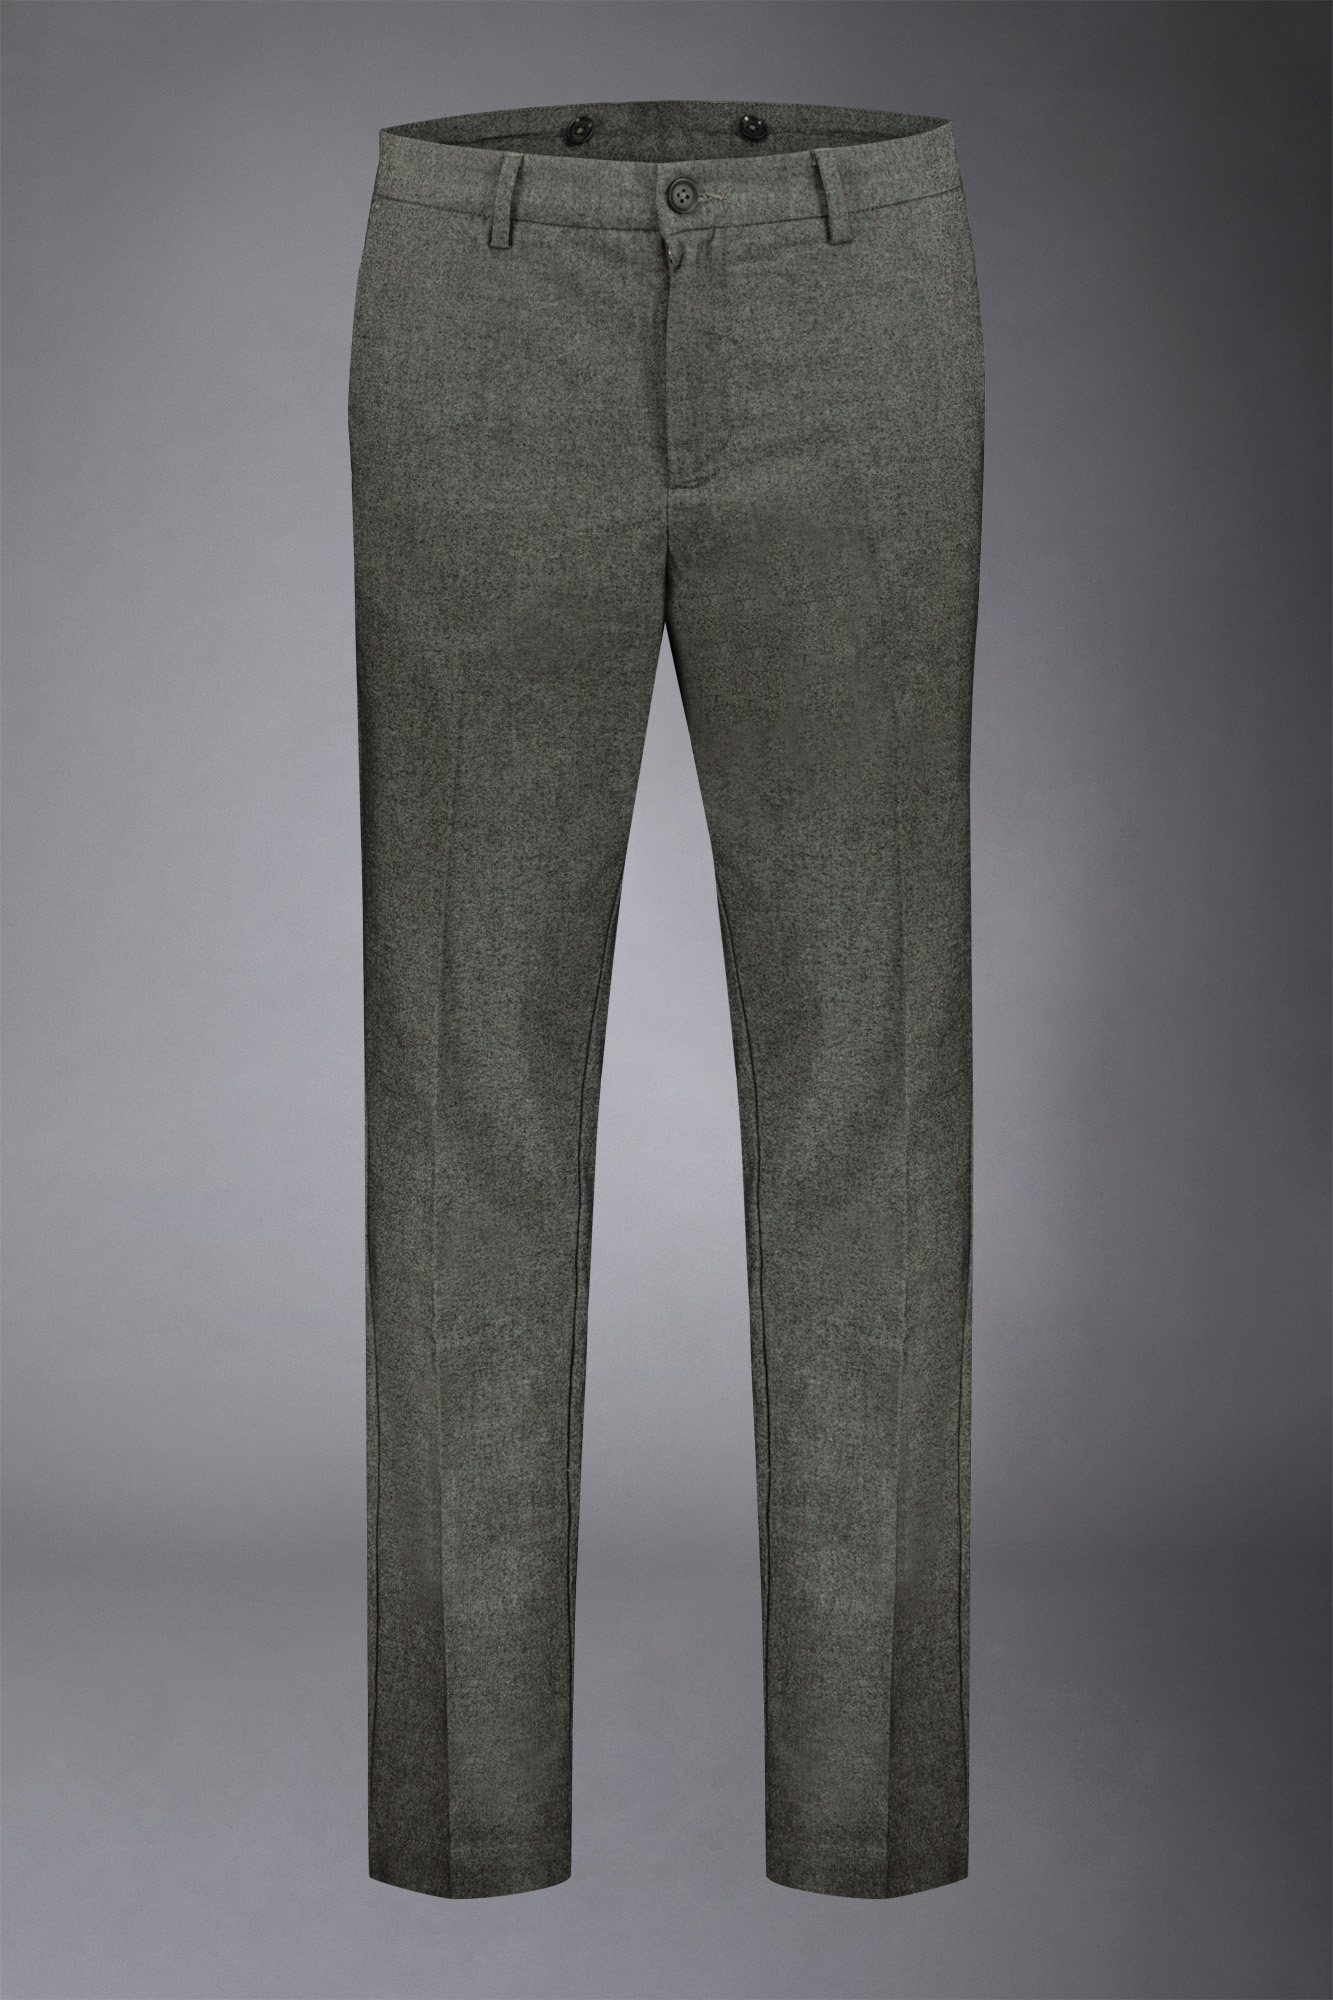 Men's chino pants woven cotton hand wool tweed regular fit image number null